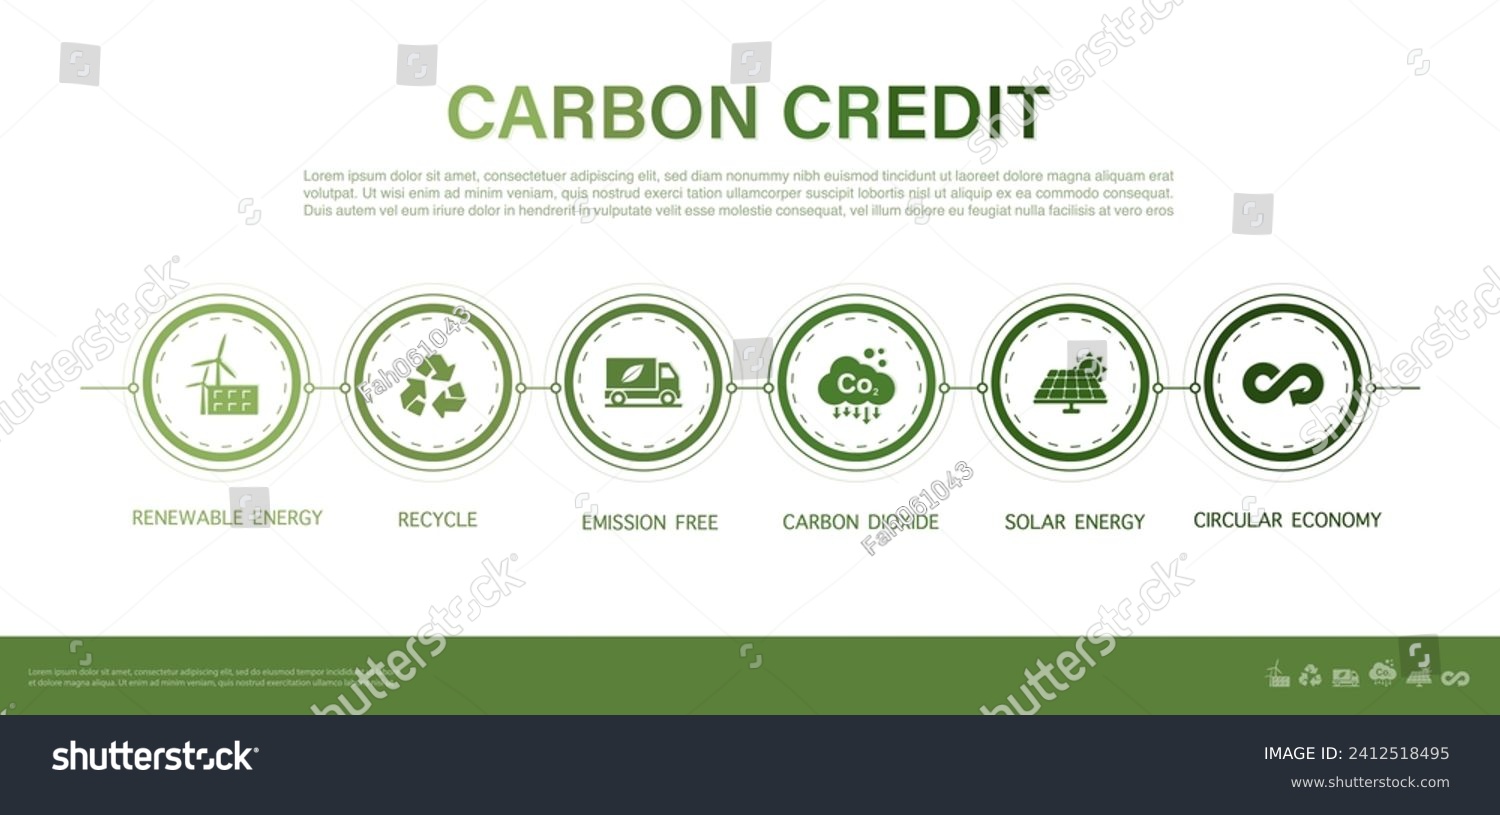 SVG of Carbon credits Concepts about the amount of reducing carbon dioxide emissions in various industrial sectors. Business and environment sustainable. Green energy vector illustration. svg